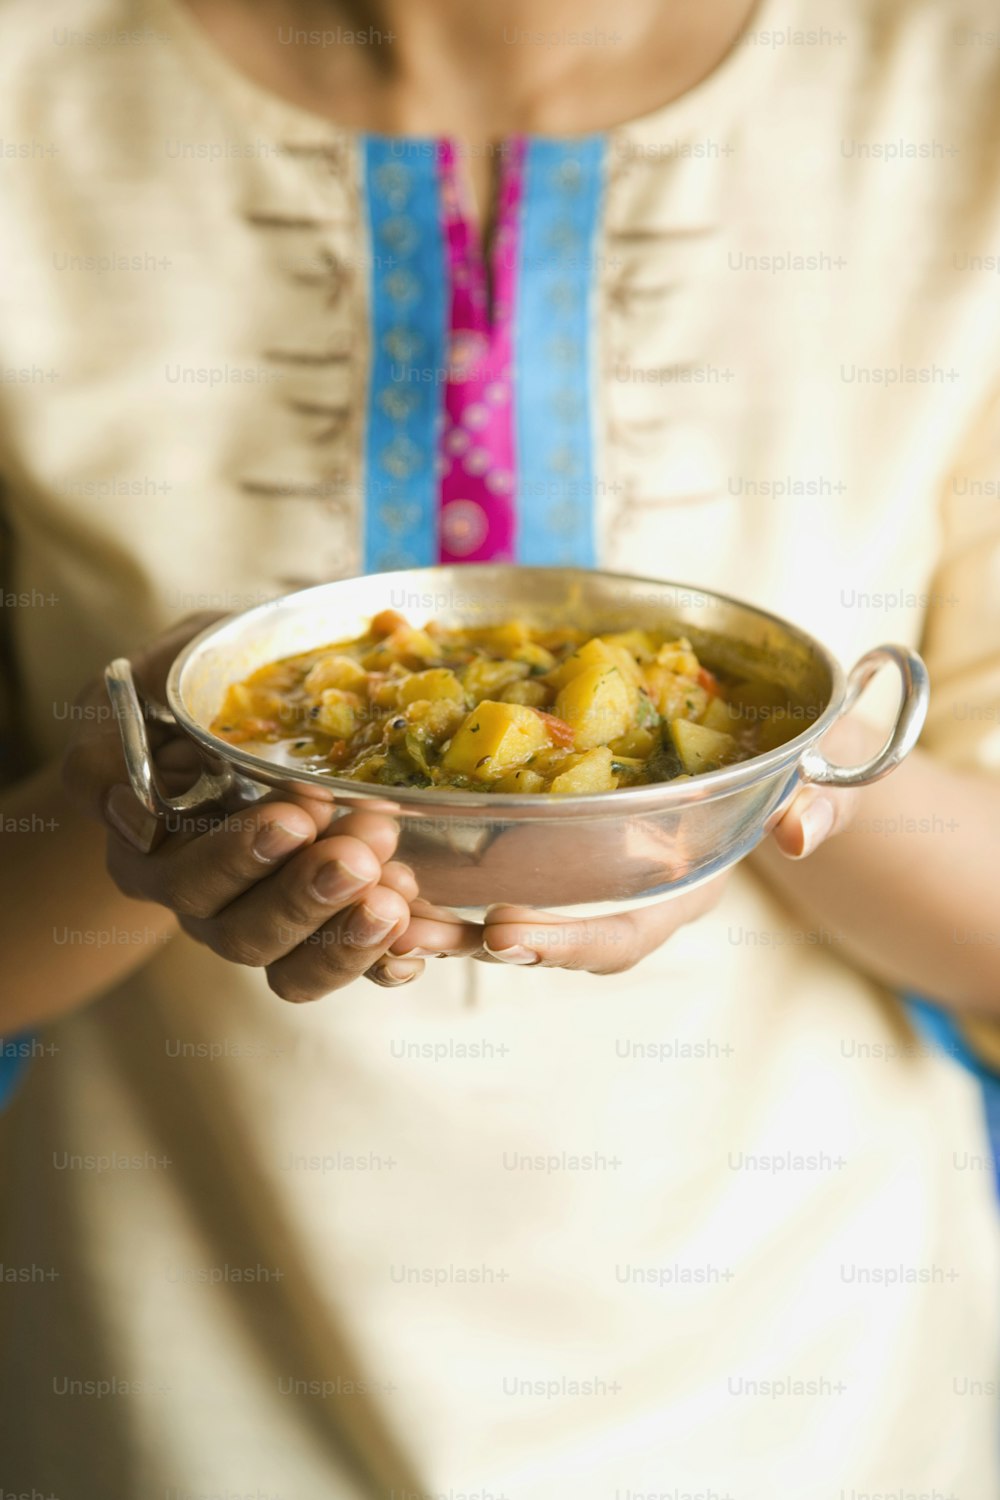 a woman holding a bowl of food in her hands